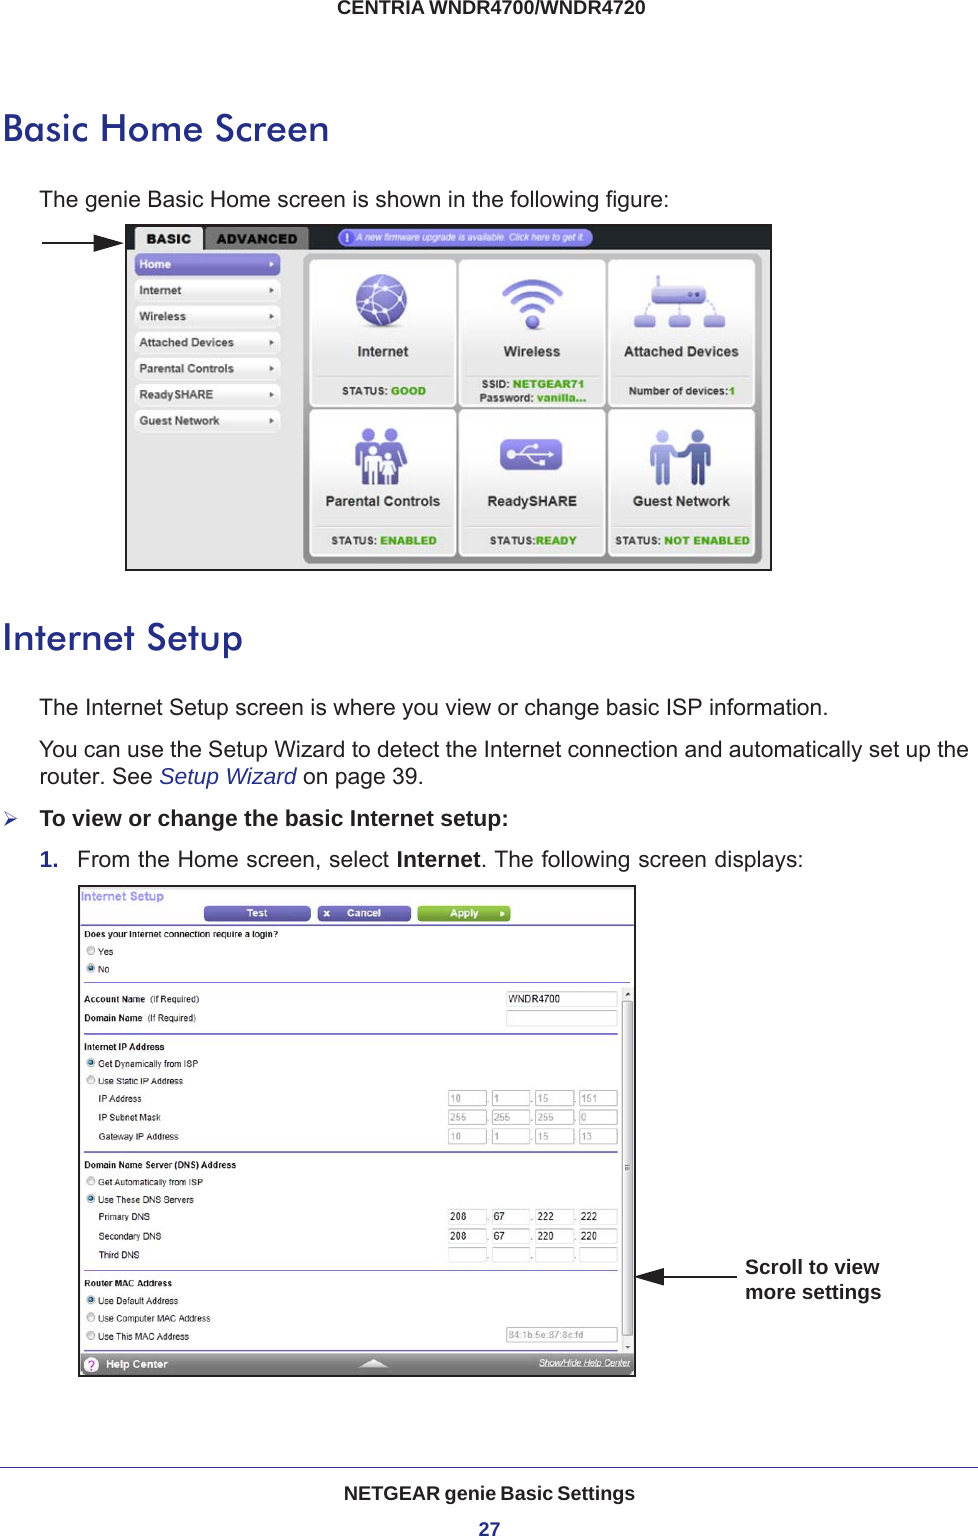 NETGEAR genie Basic Settings27 CENTRIA WNDR4700/WNDR4720Basic Home ScreenThe genie Basic Home screen is shown in the following figure:Internet SetupThe Internet Setup screen is where you view or change basic ISP information.You can use the Setup Wizard to detect the Internet connection and automatically set up the router. See Setup Wizard on page  39.To view or change the basic Internet setup:1.  From the Home screen, select Internet. The following screen displays:Scroll to view more settings